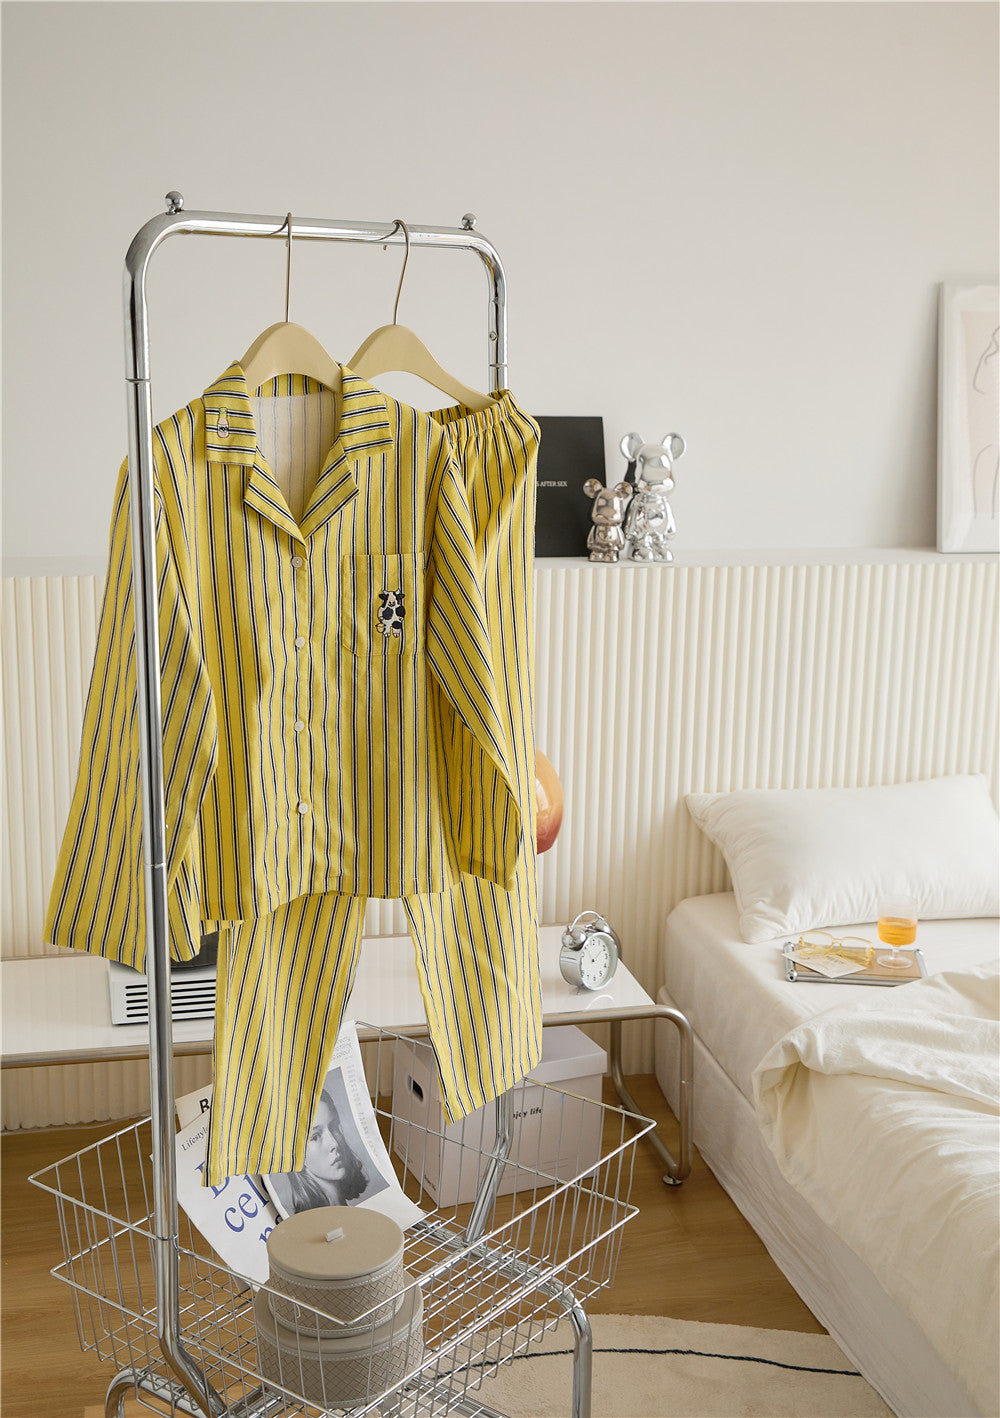 Brushed Cotton Cow Embroidered Striped Pajama Set